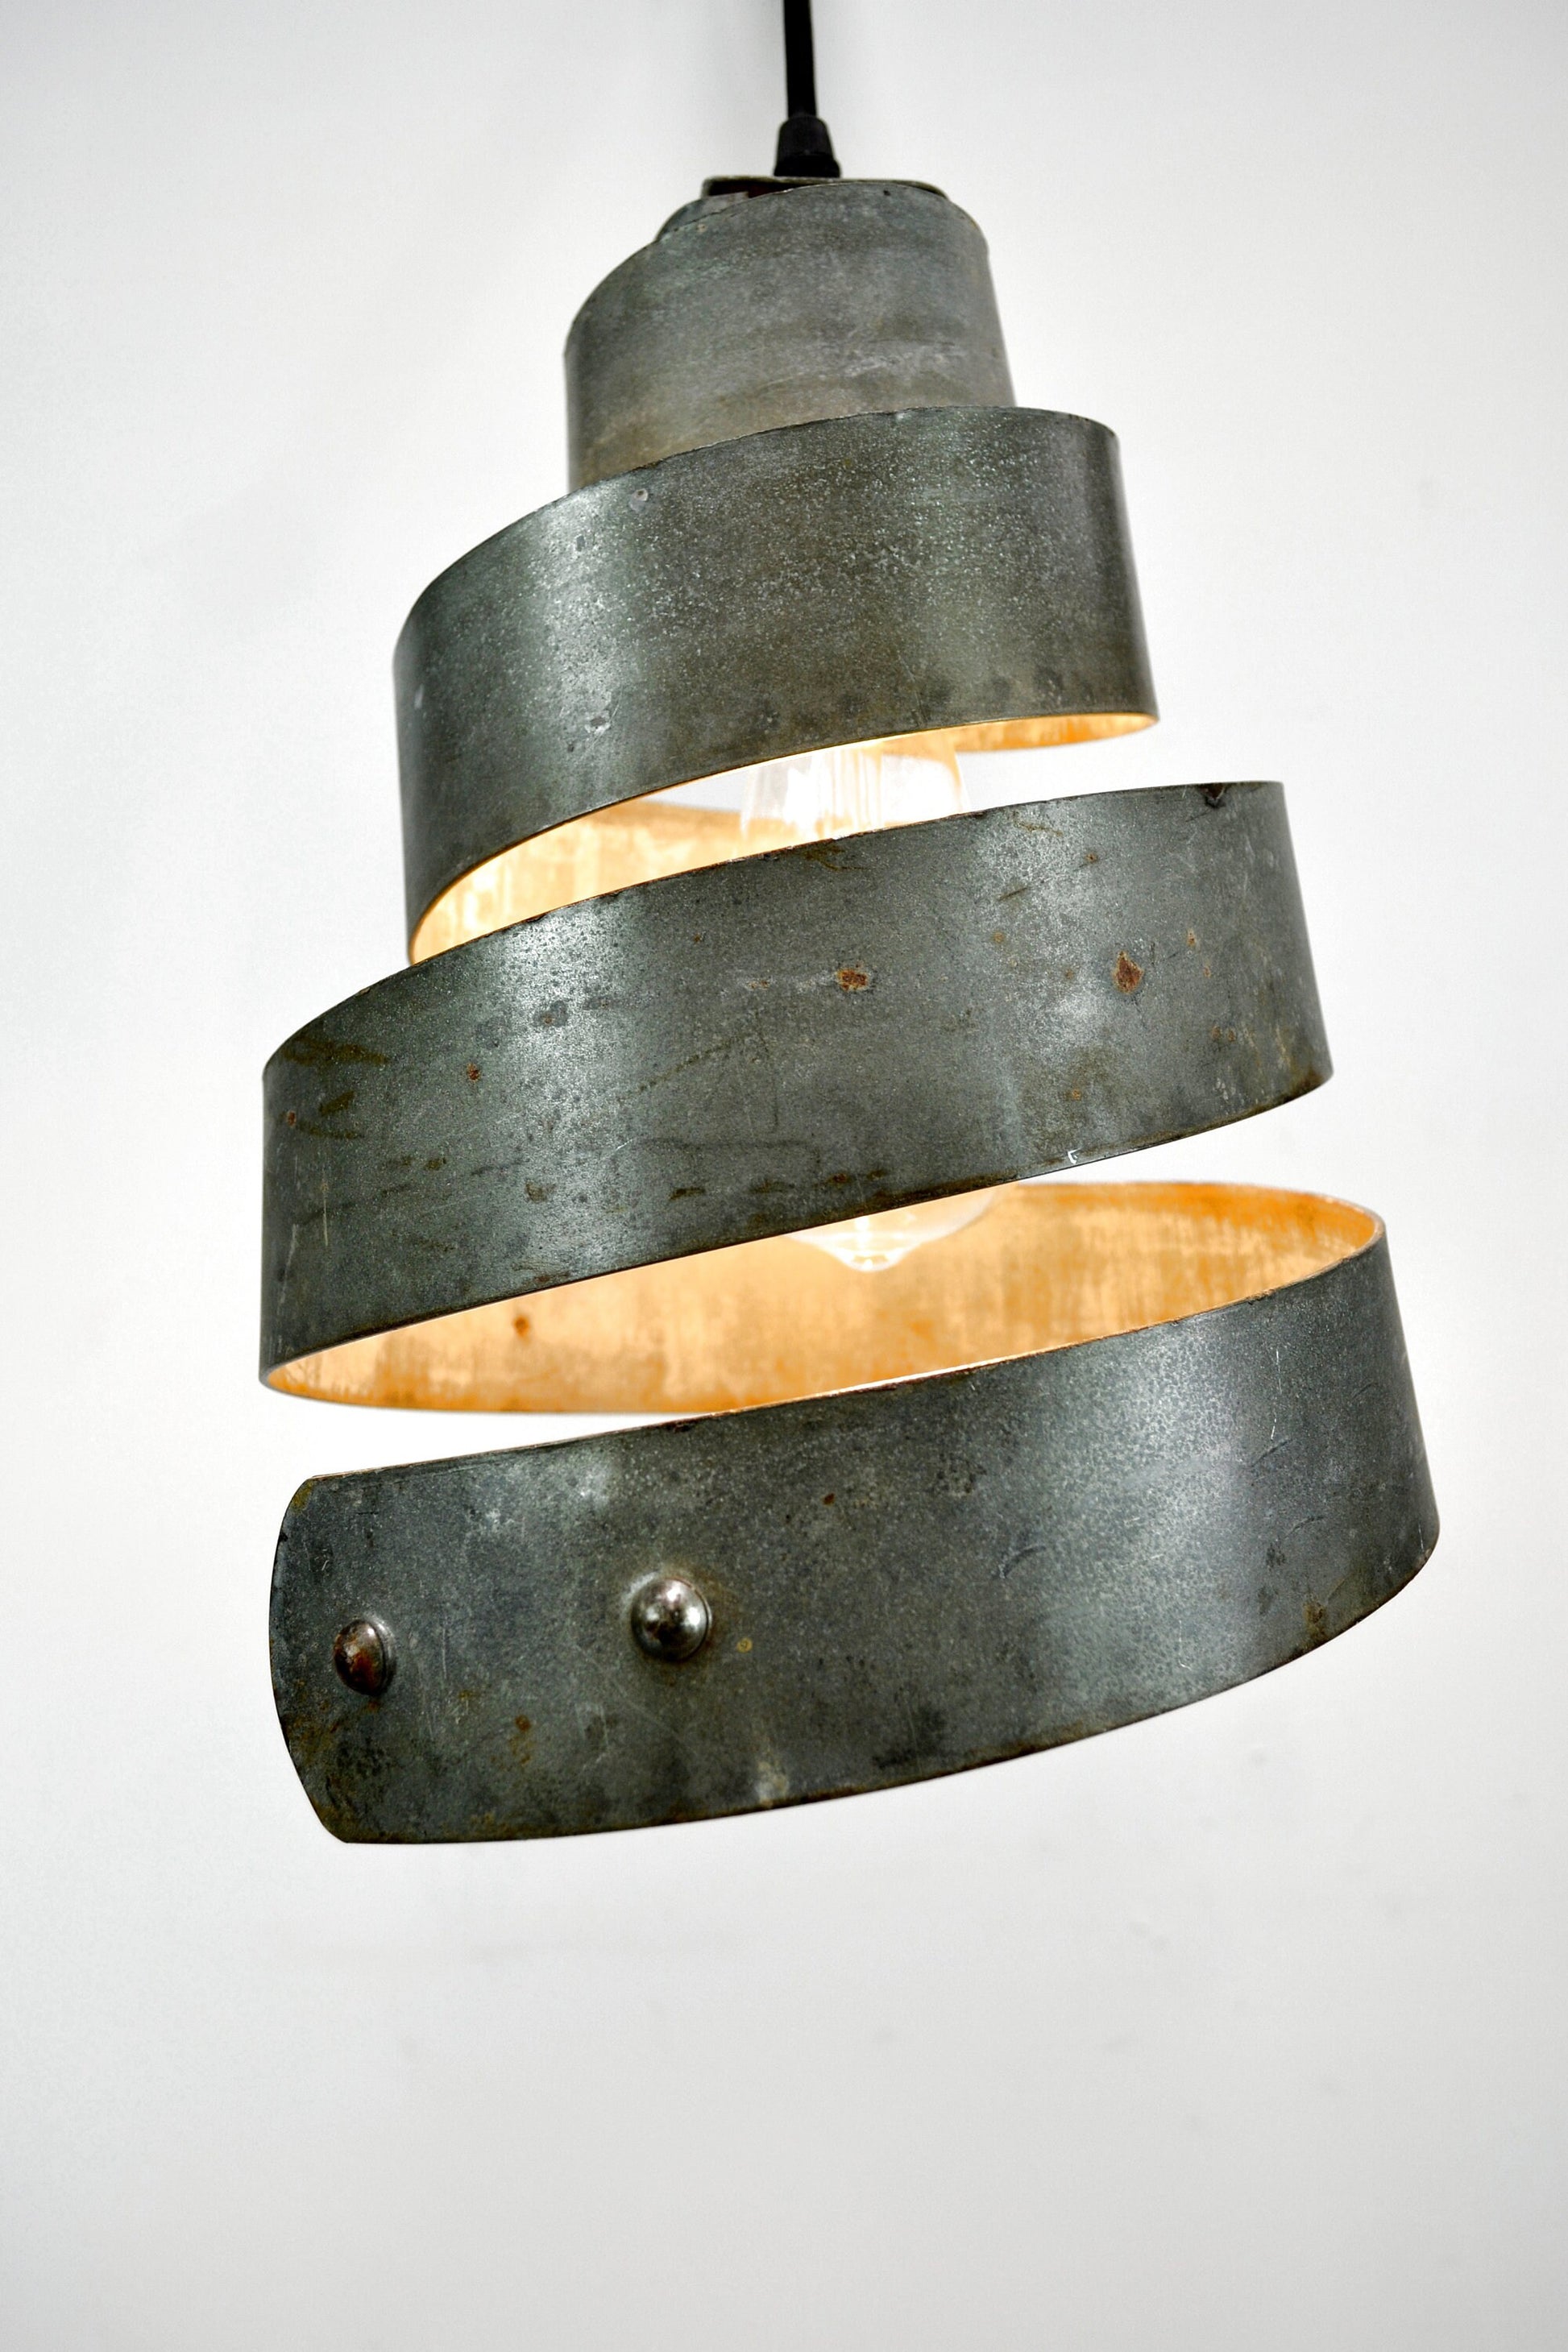 Wine Barrel Ring Pendant Light - Lavaliere - Made from Retired California wine barrel rings 100% Recycled!